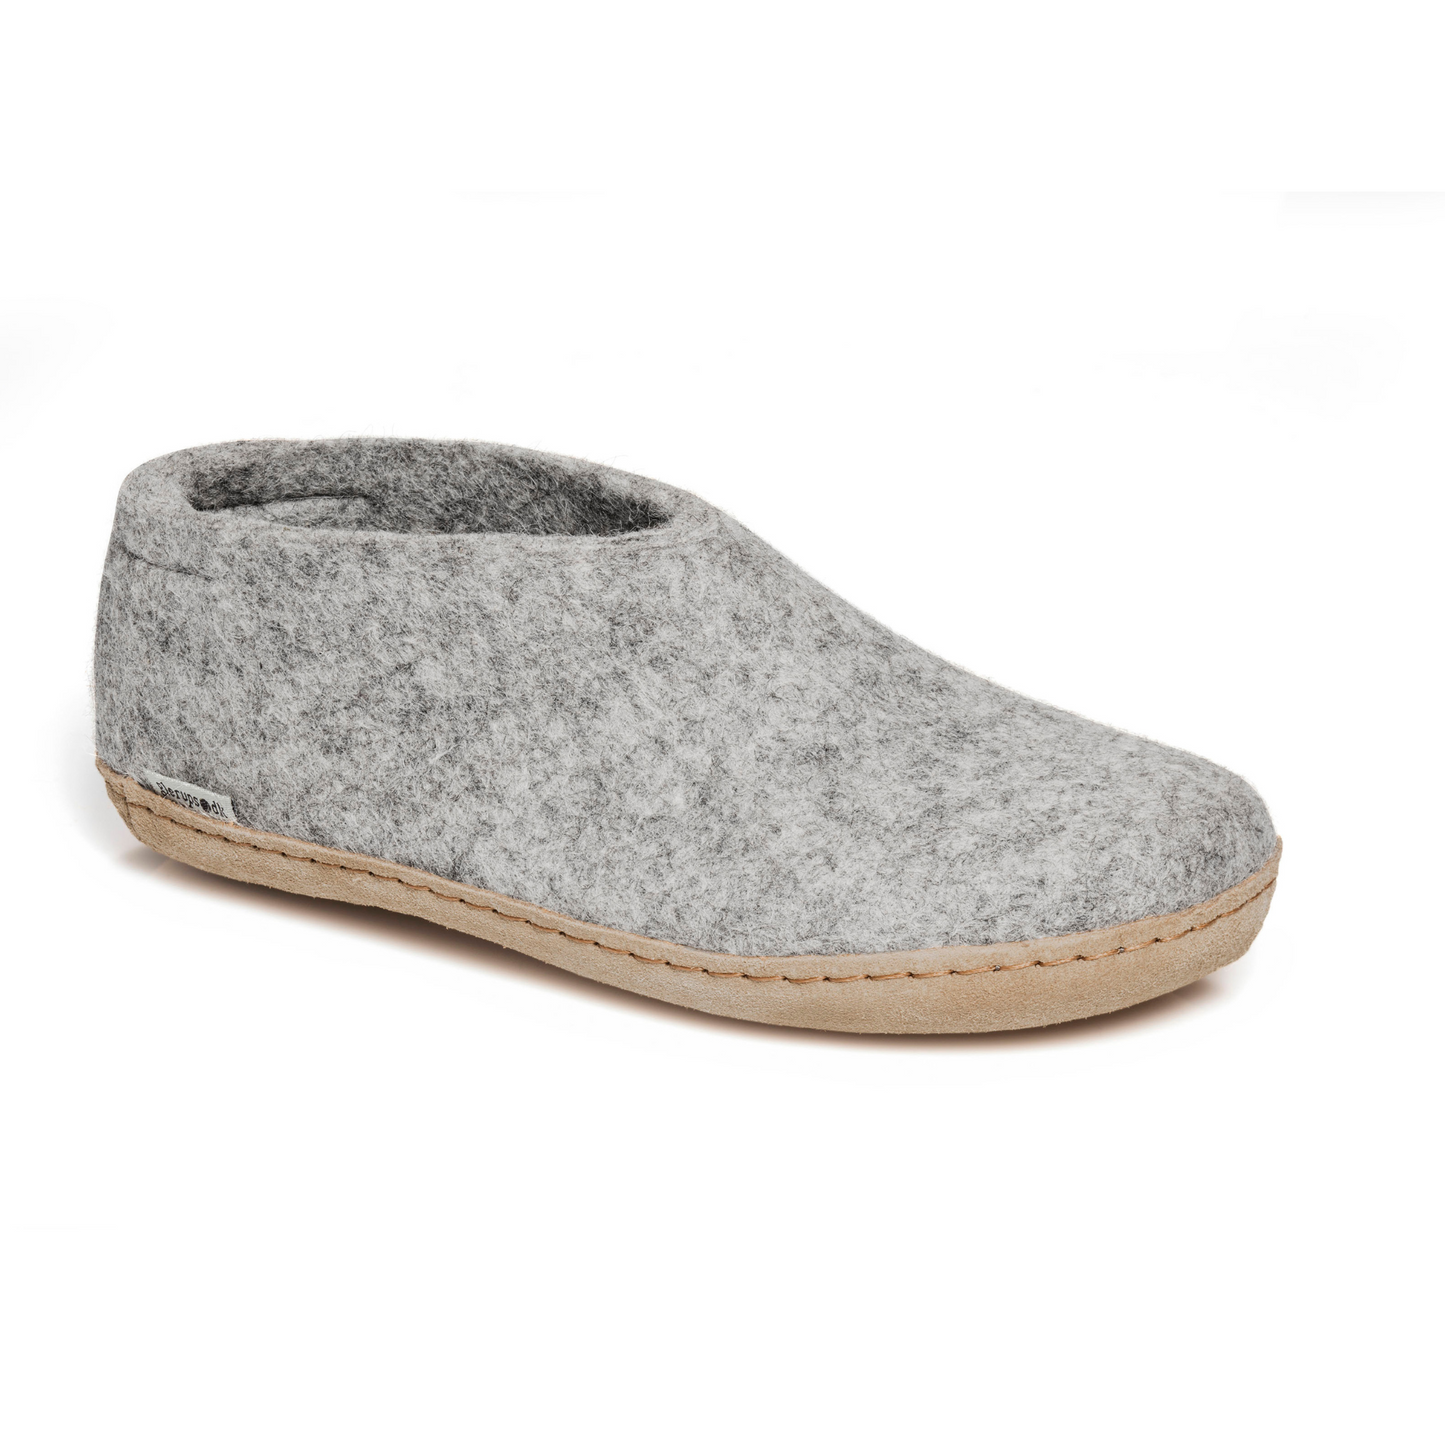 A felted light grey tall-back slipper pictured at a slight angle, showing part of the top front and side of the slipper. A tan leather sole lines the bottom of the shoe with a row of stitching.